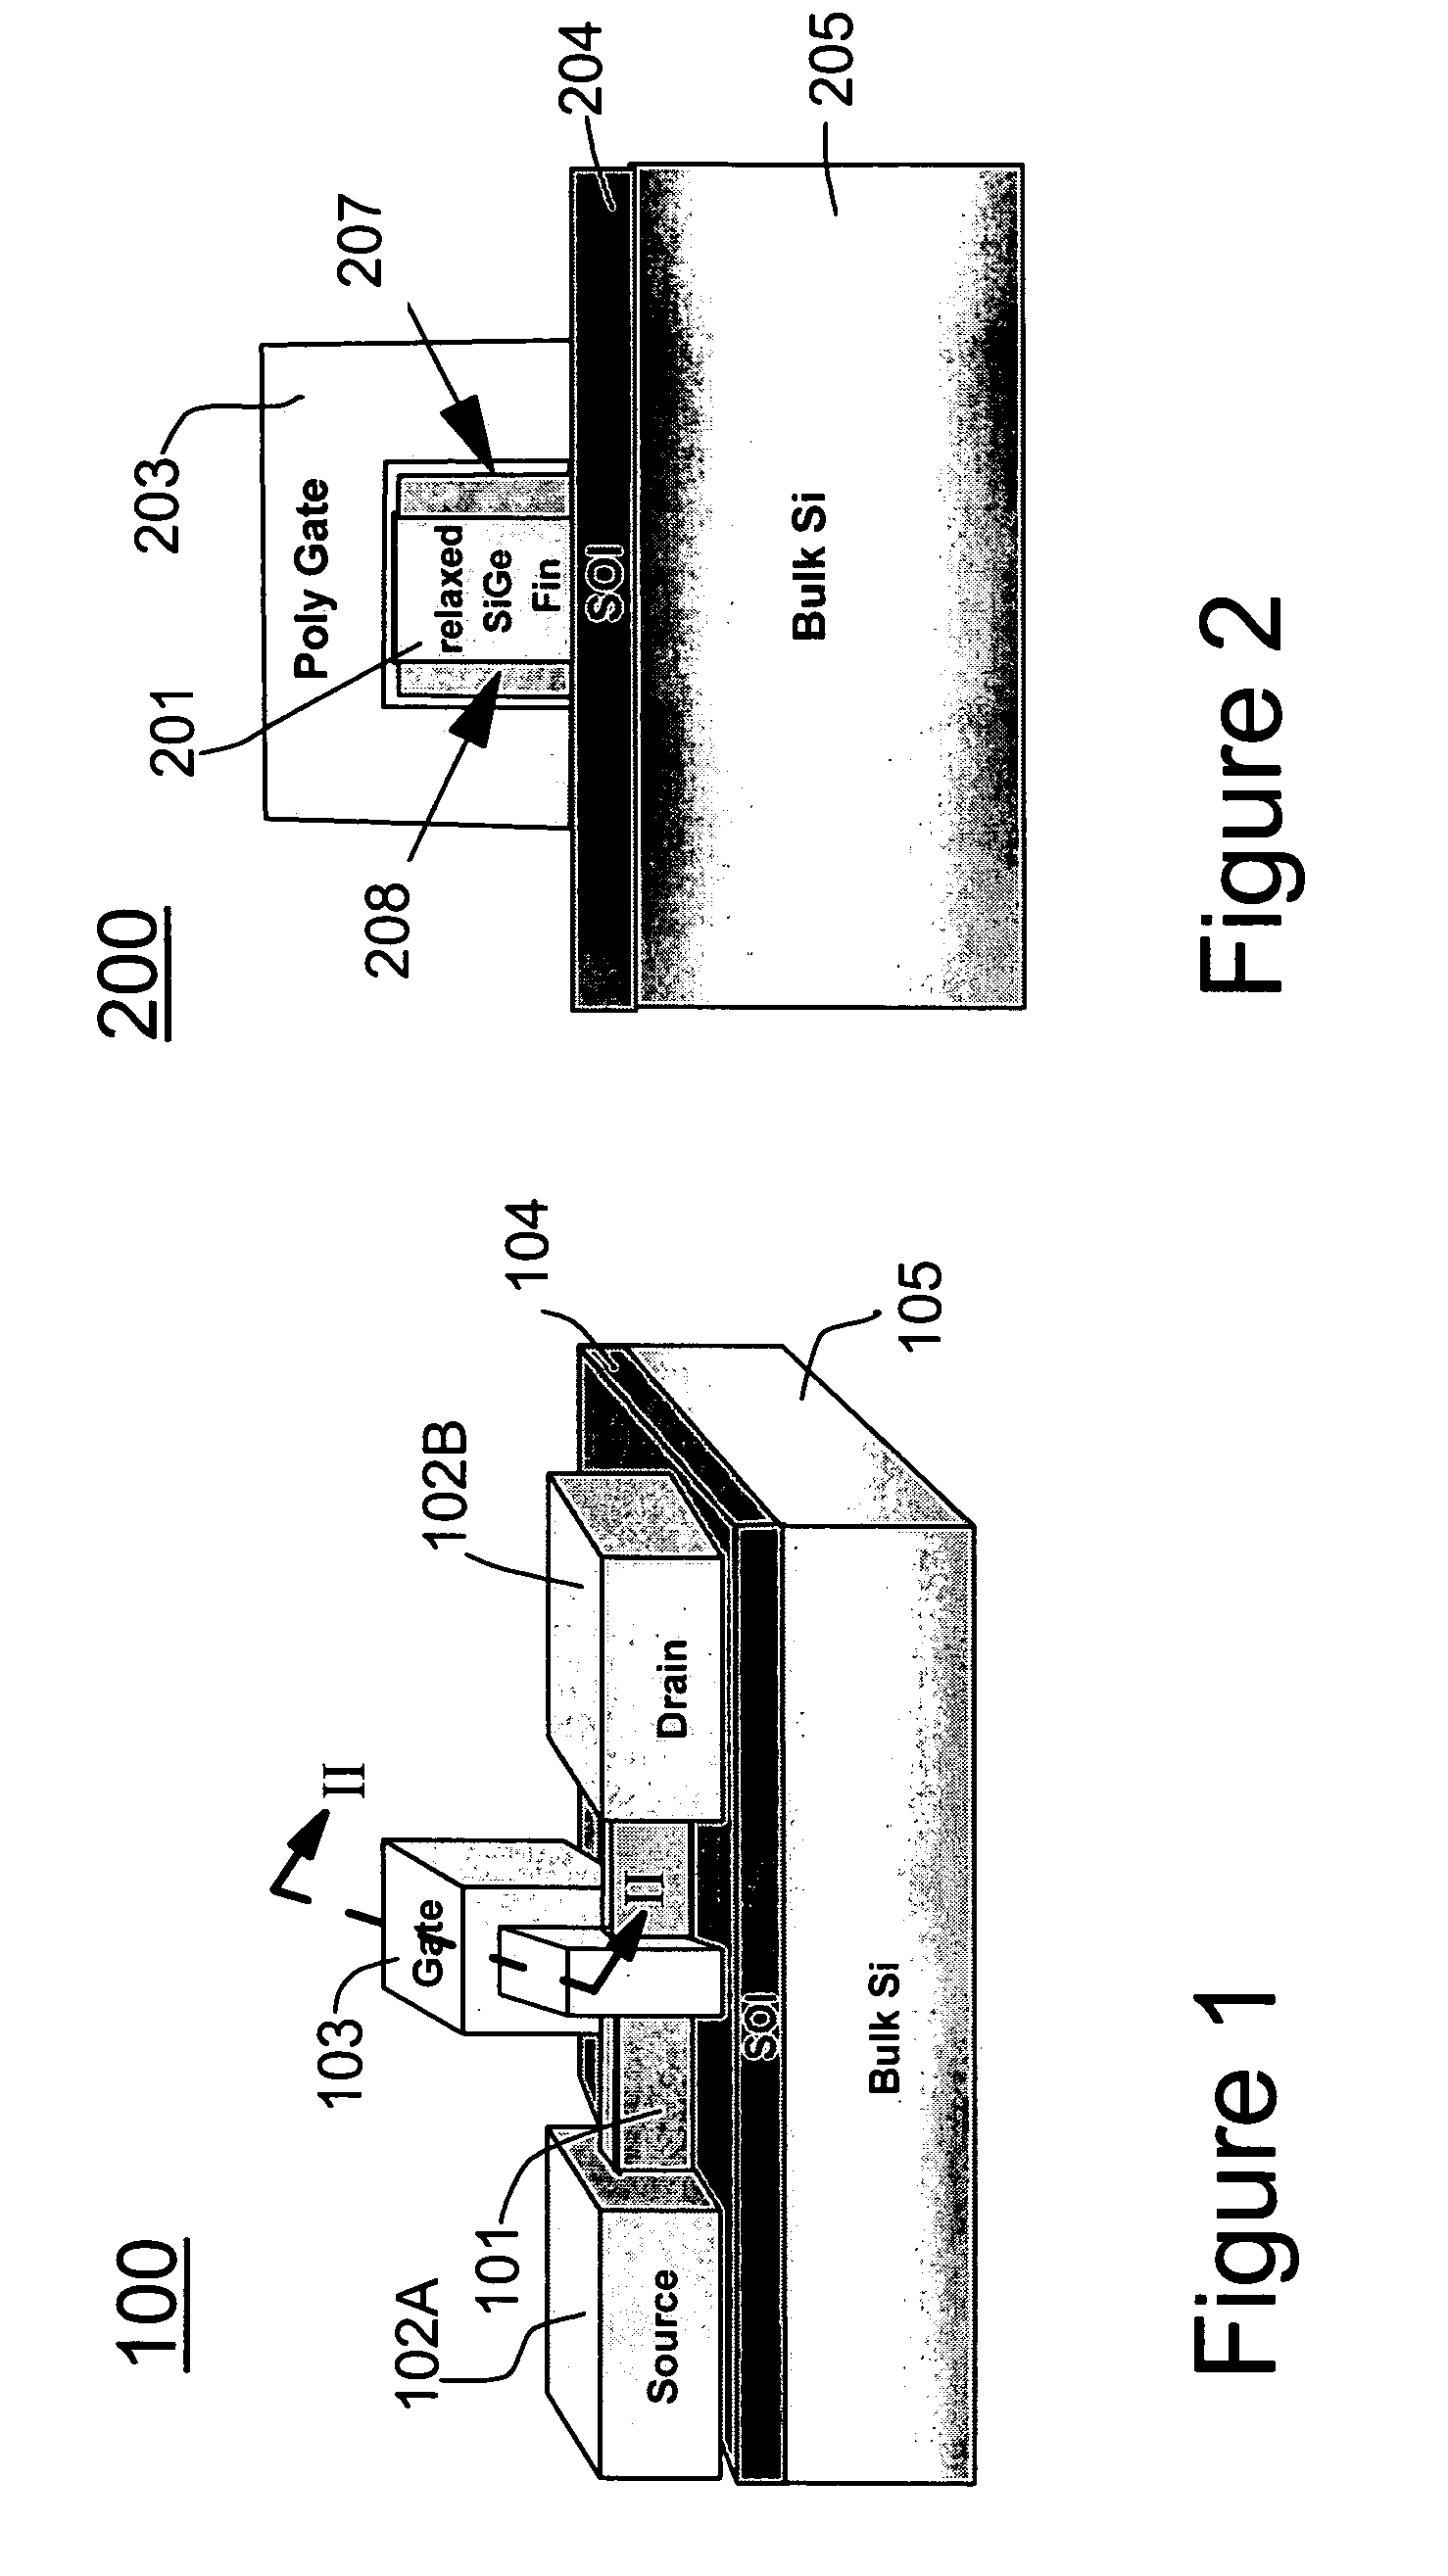 High performance strained silicon FinFETs device and method for forming same